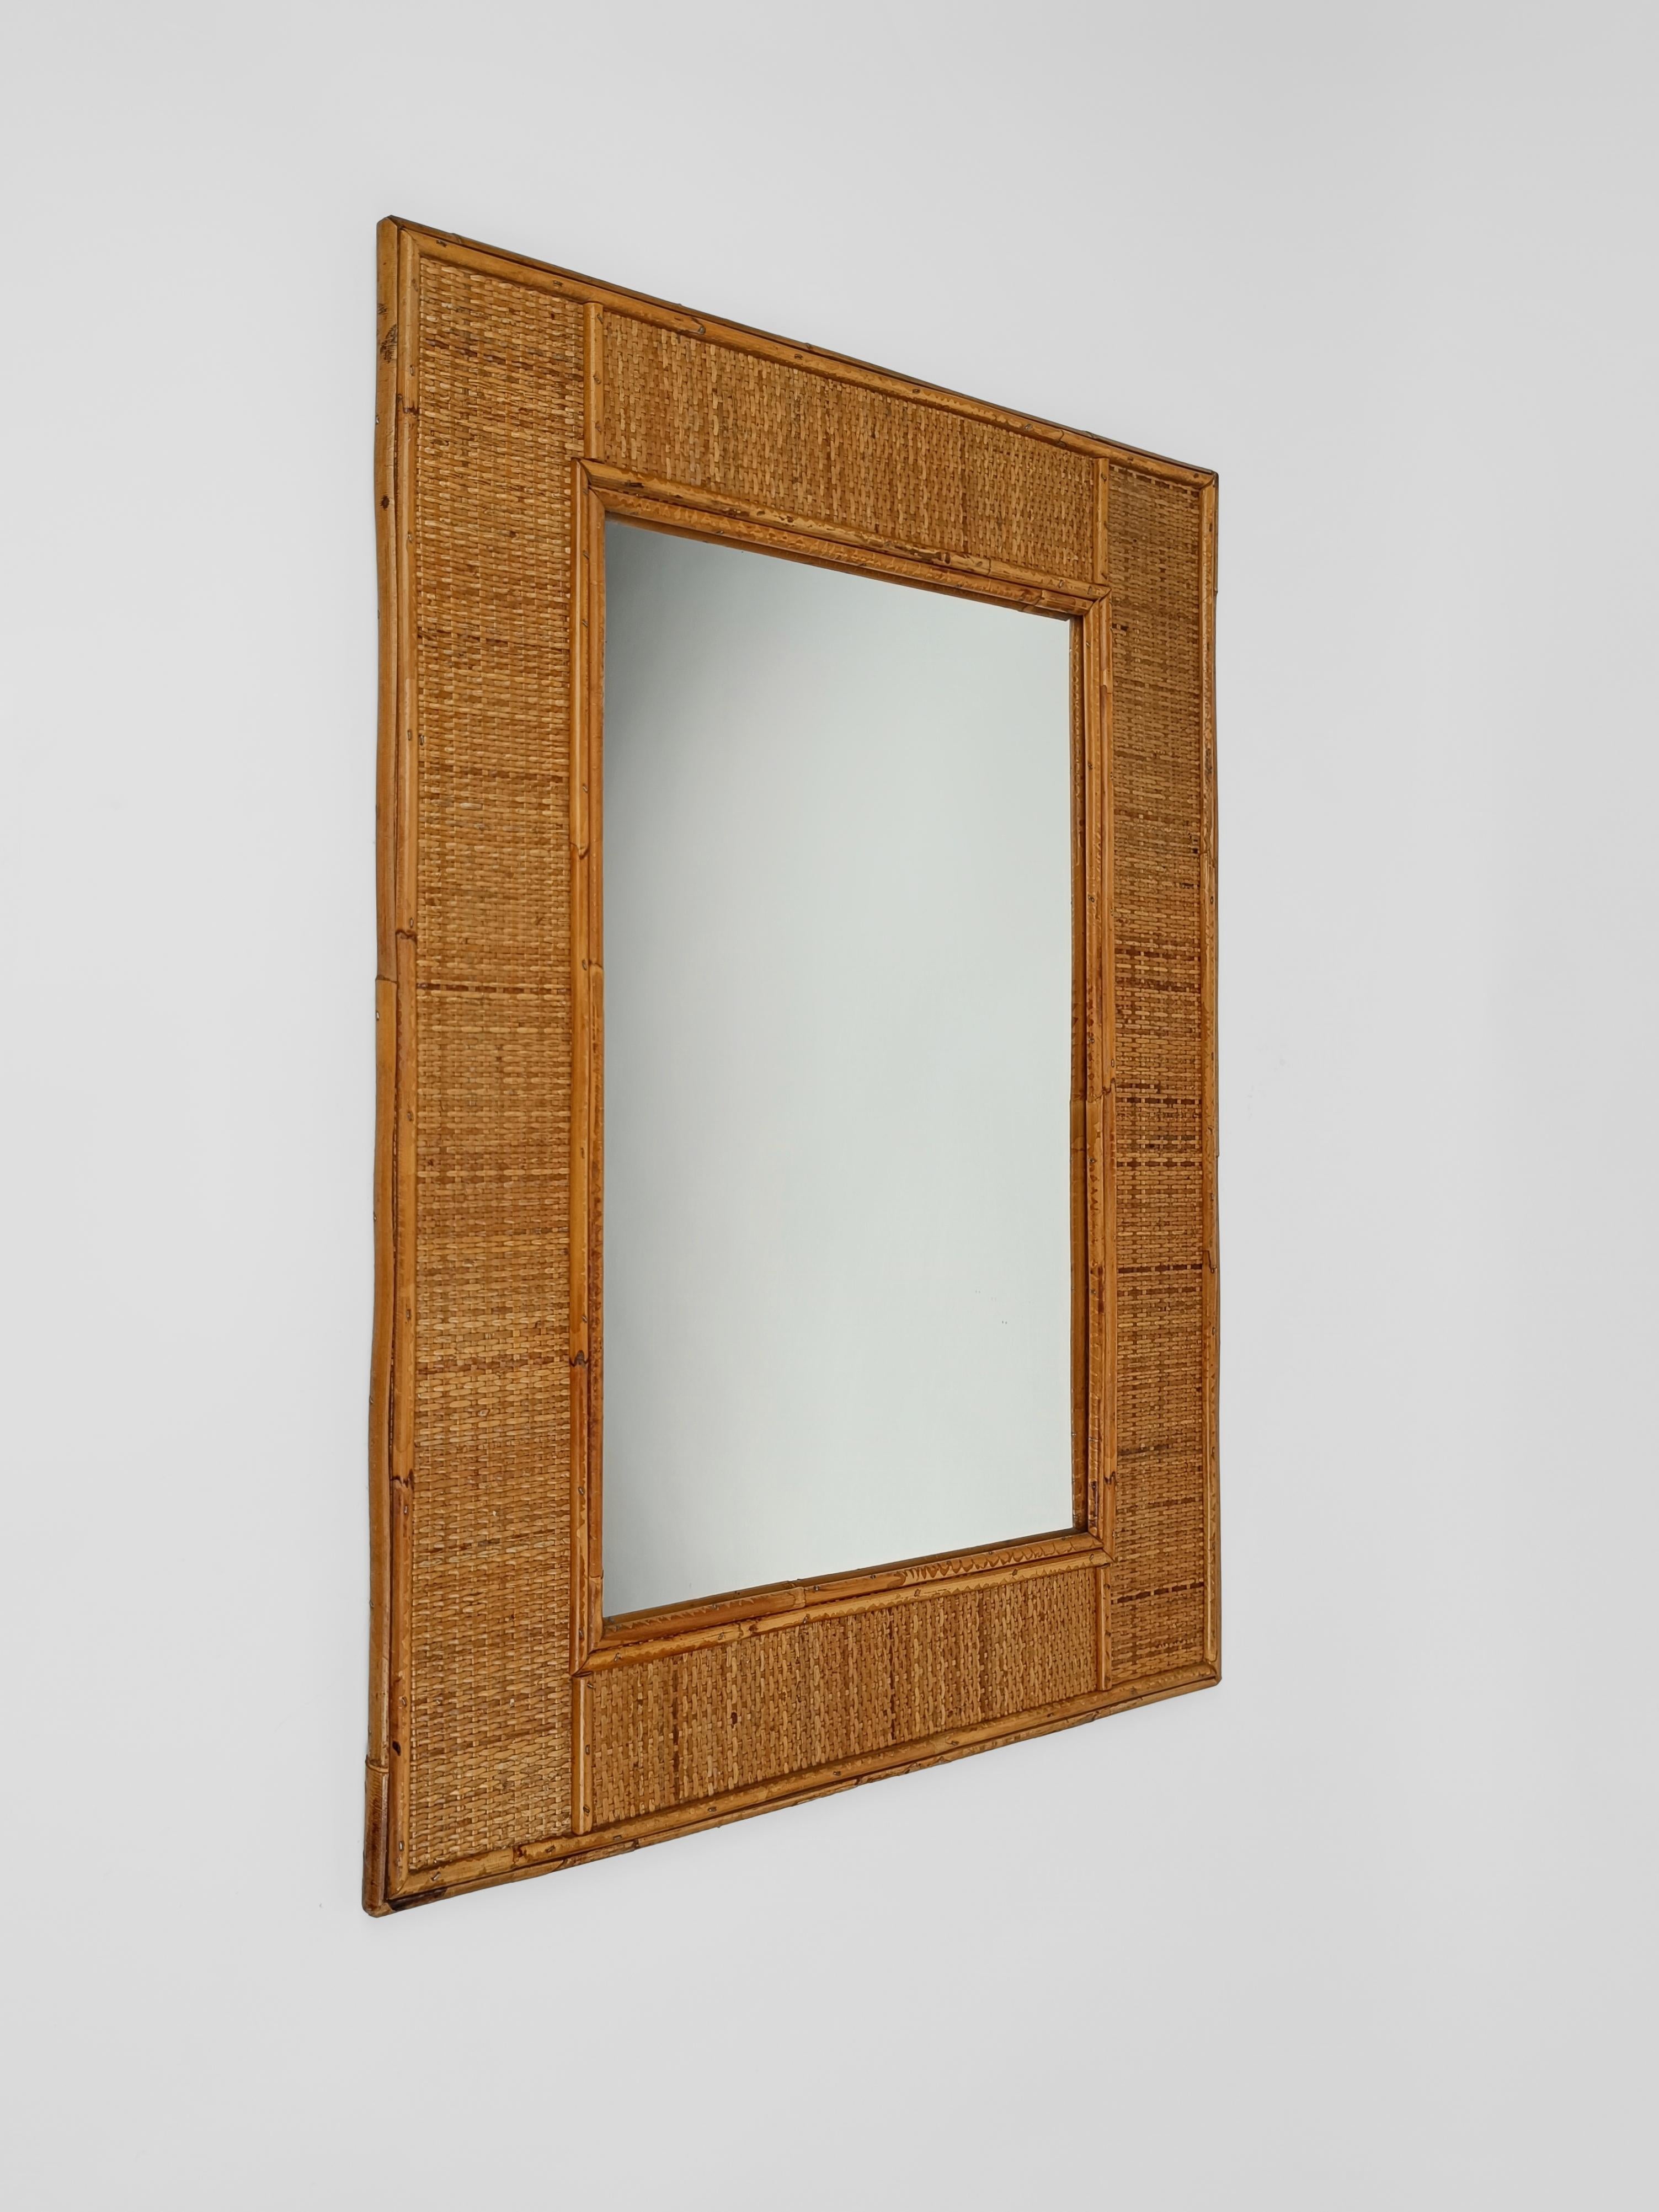 20th Century Mid-Century Bamboo and Woven Rectangular Wicker Mirror, Italy, 1970 For Sale